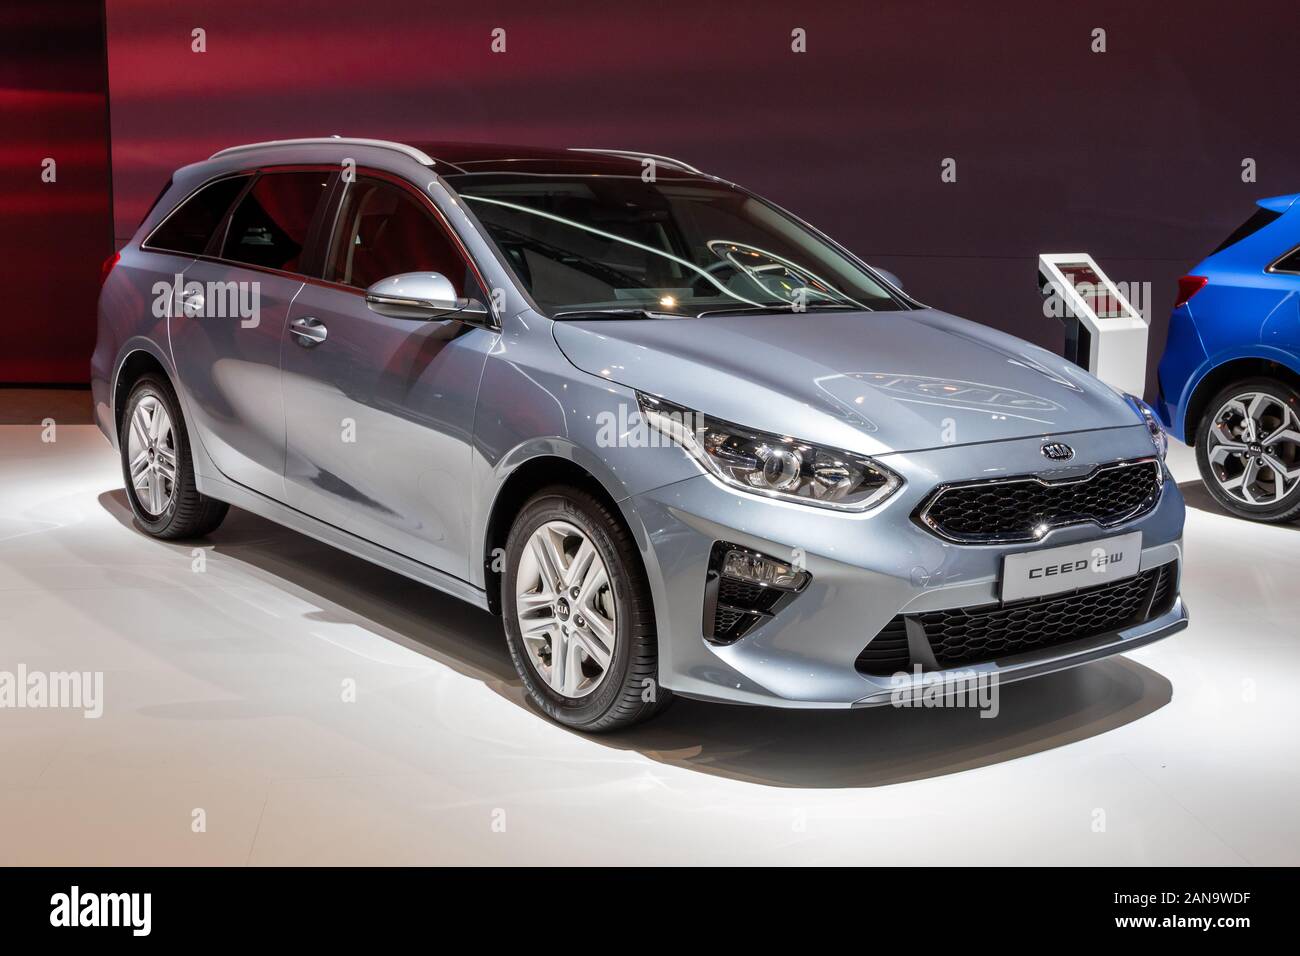 BRUSSELS - JAN 9, 2020: New Kia Ceed Sportswagon car model presented at the Brussels Autosalon 2020 Motor Show. Stock Photo